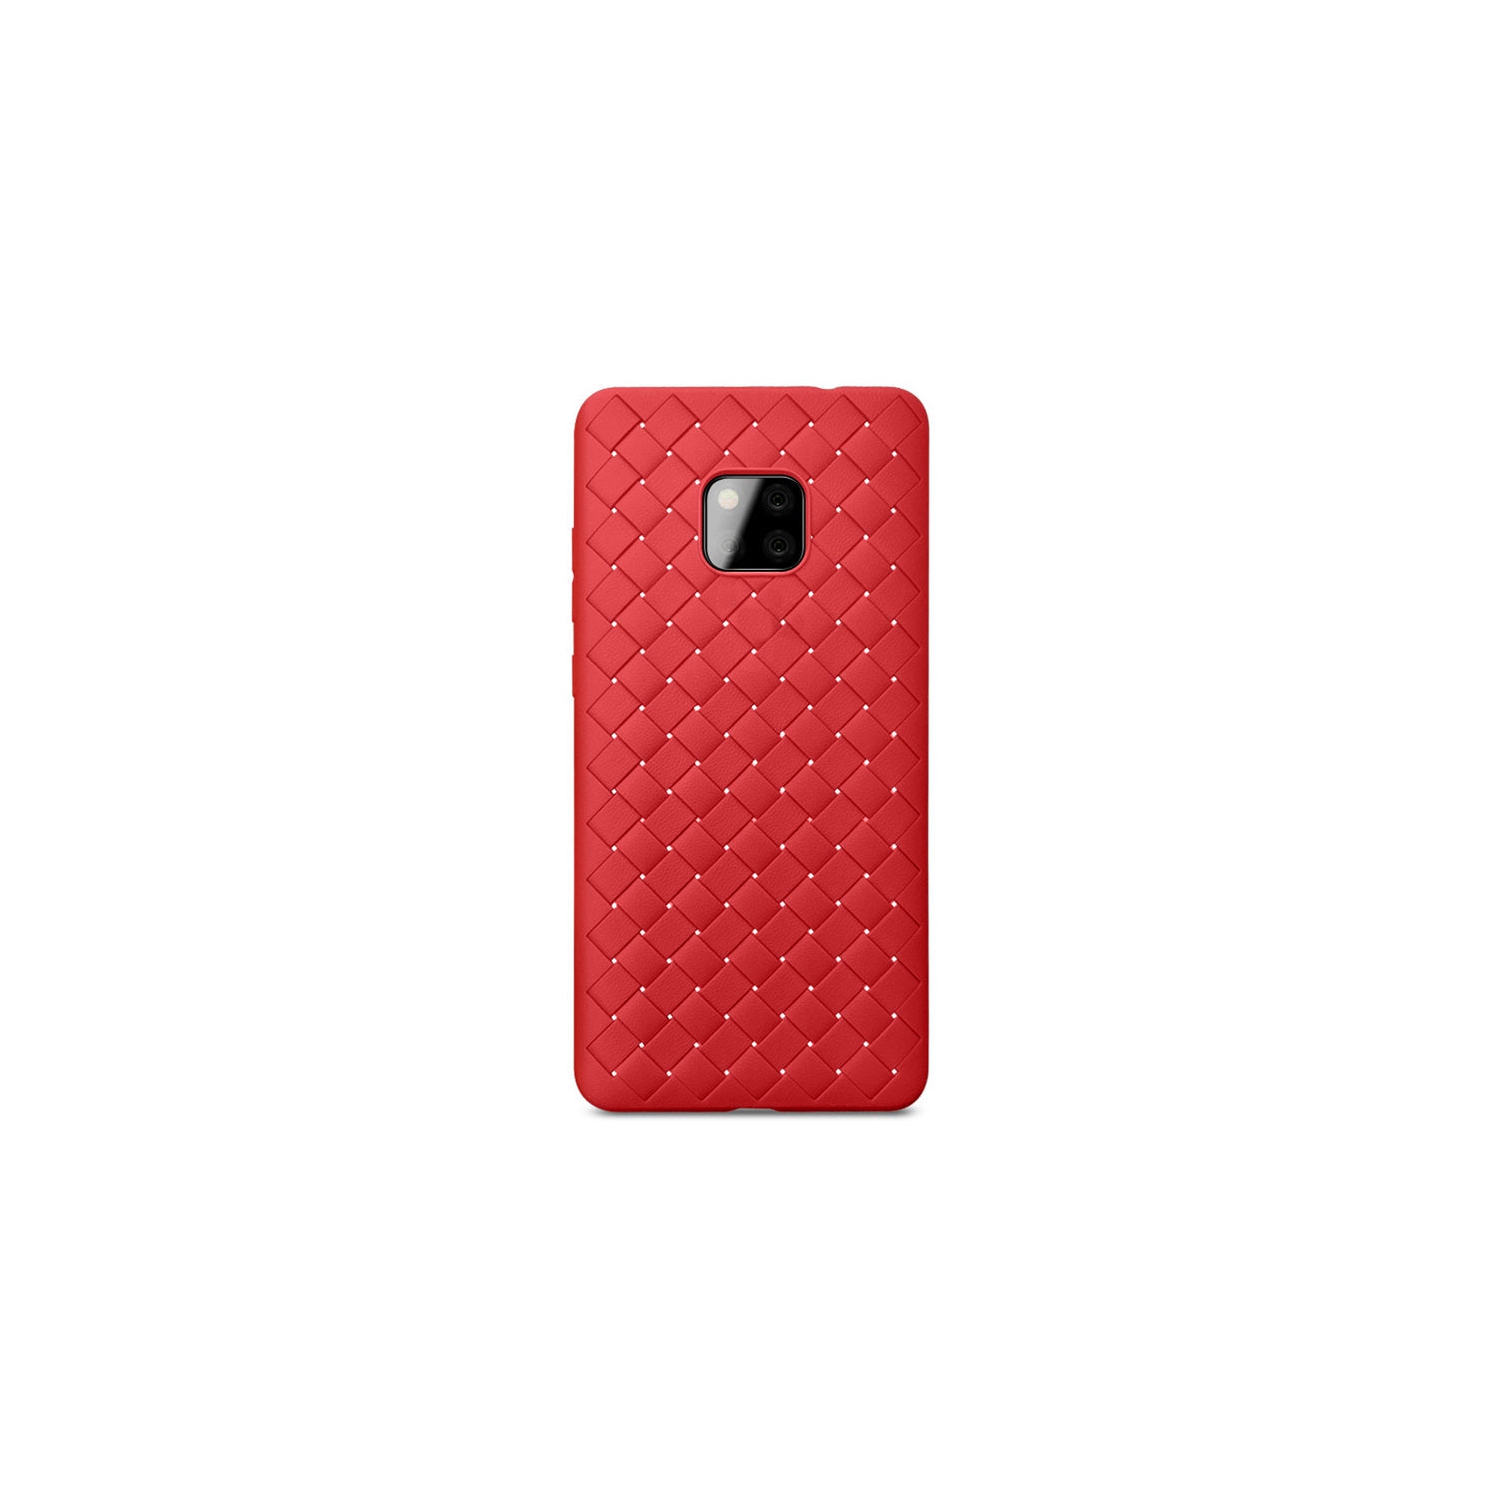 PANDACO Red Leather Cross-Weave Case for Huawei Mate 20 Pro